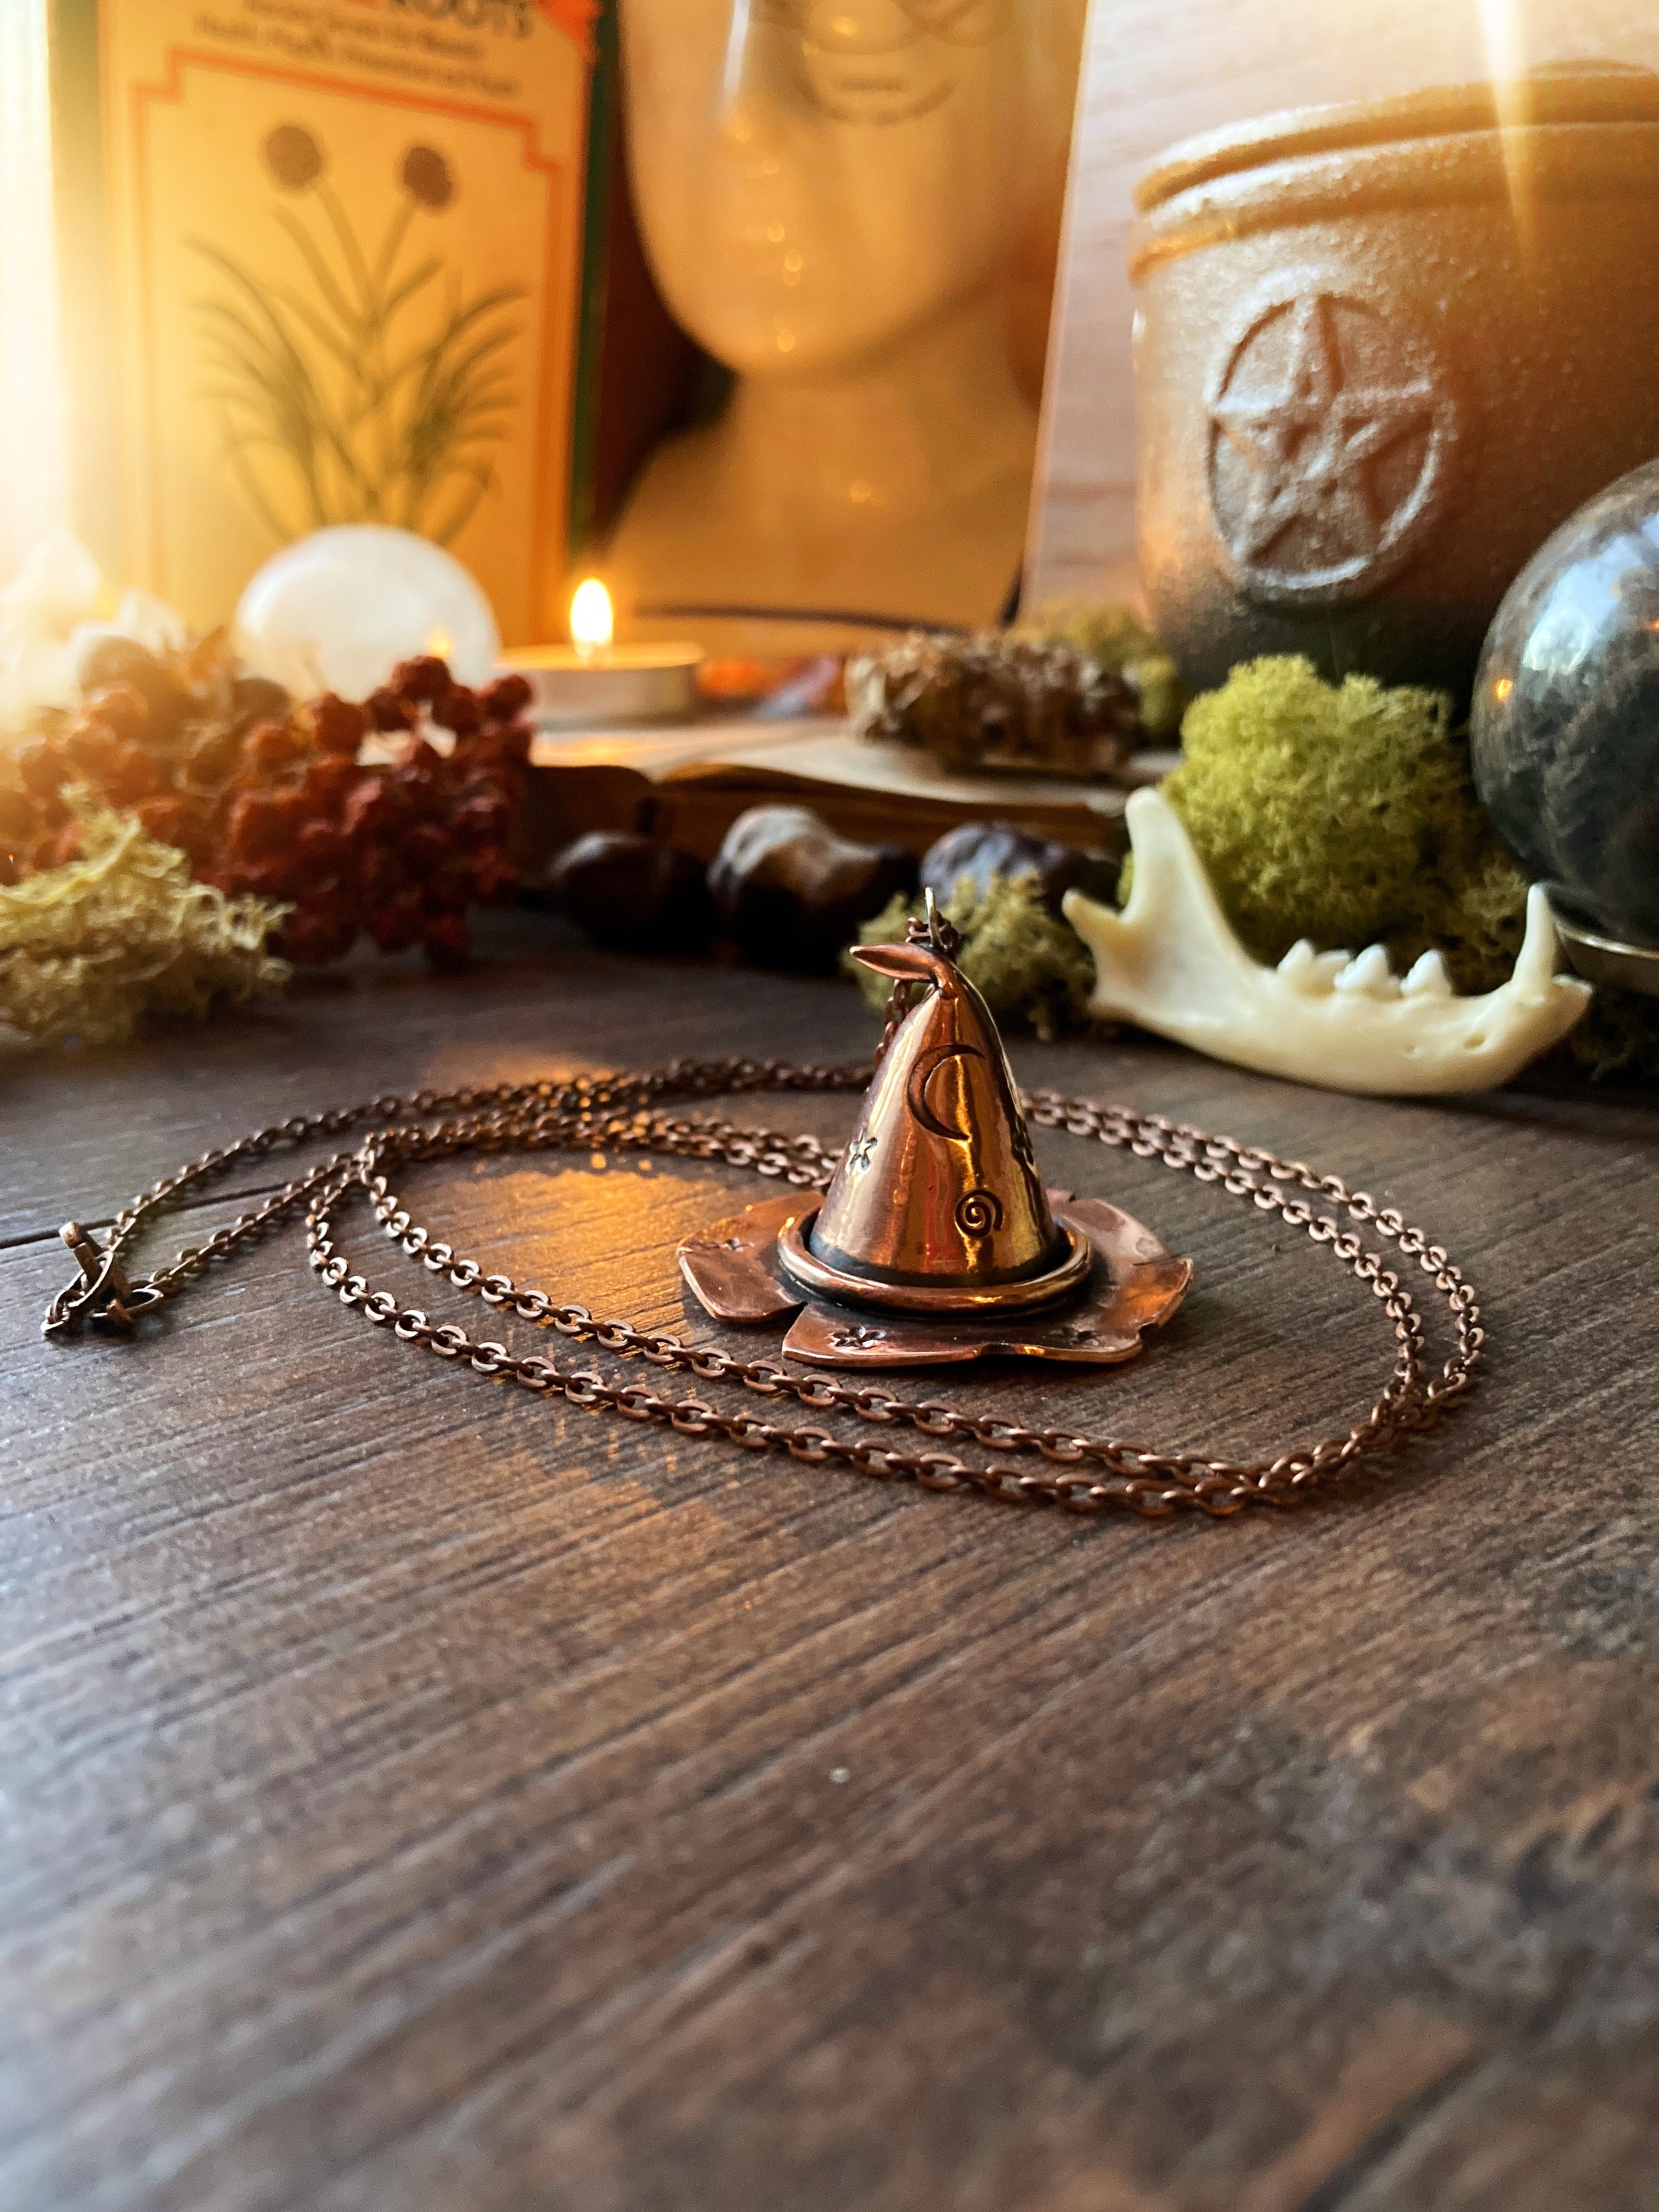 🧙🏼HOCUS POCUS🧙🏾Handmade Copper Witches Hat Necklace (Ready to ship)